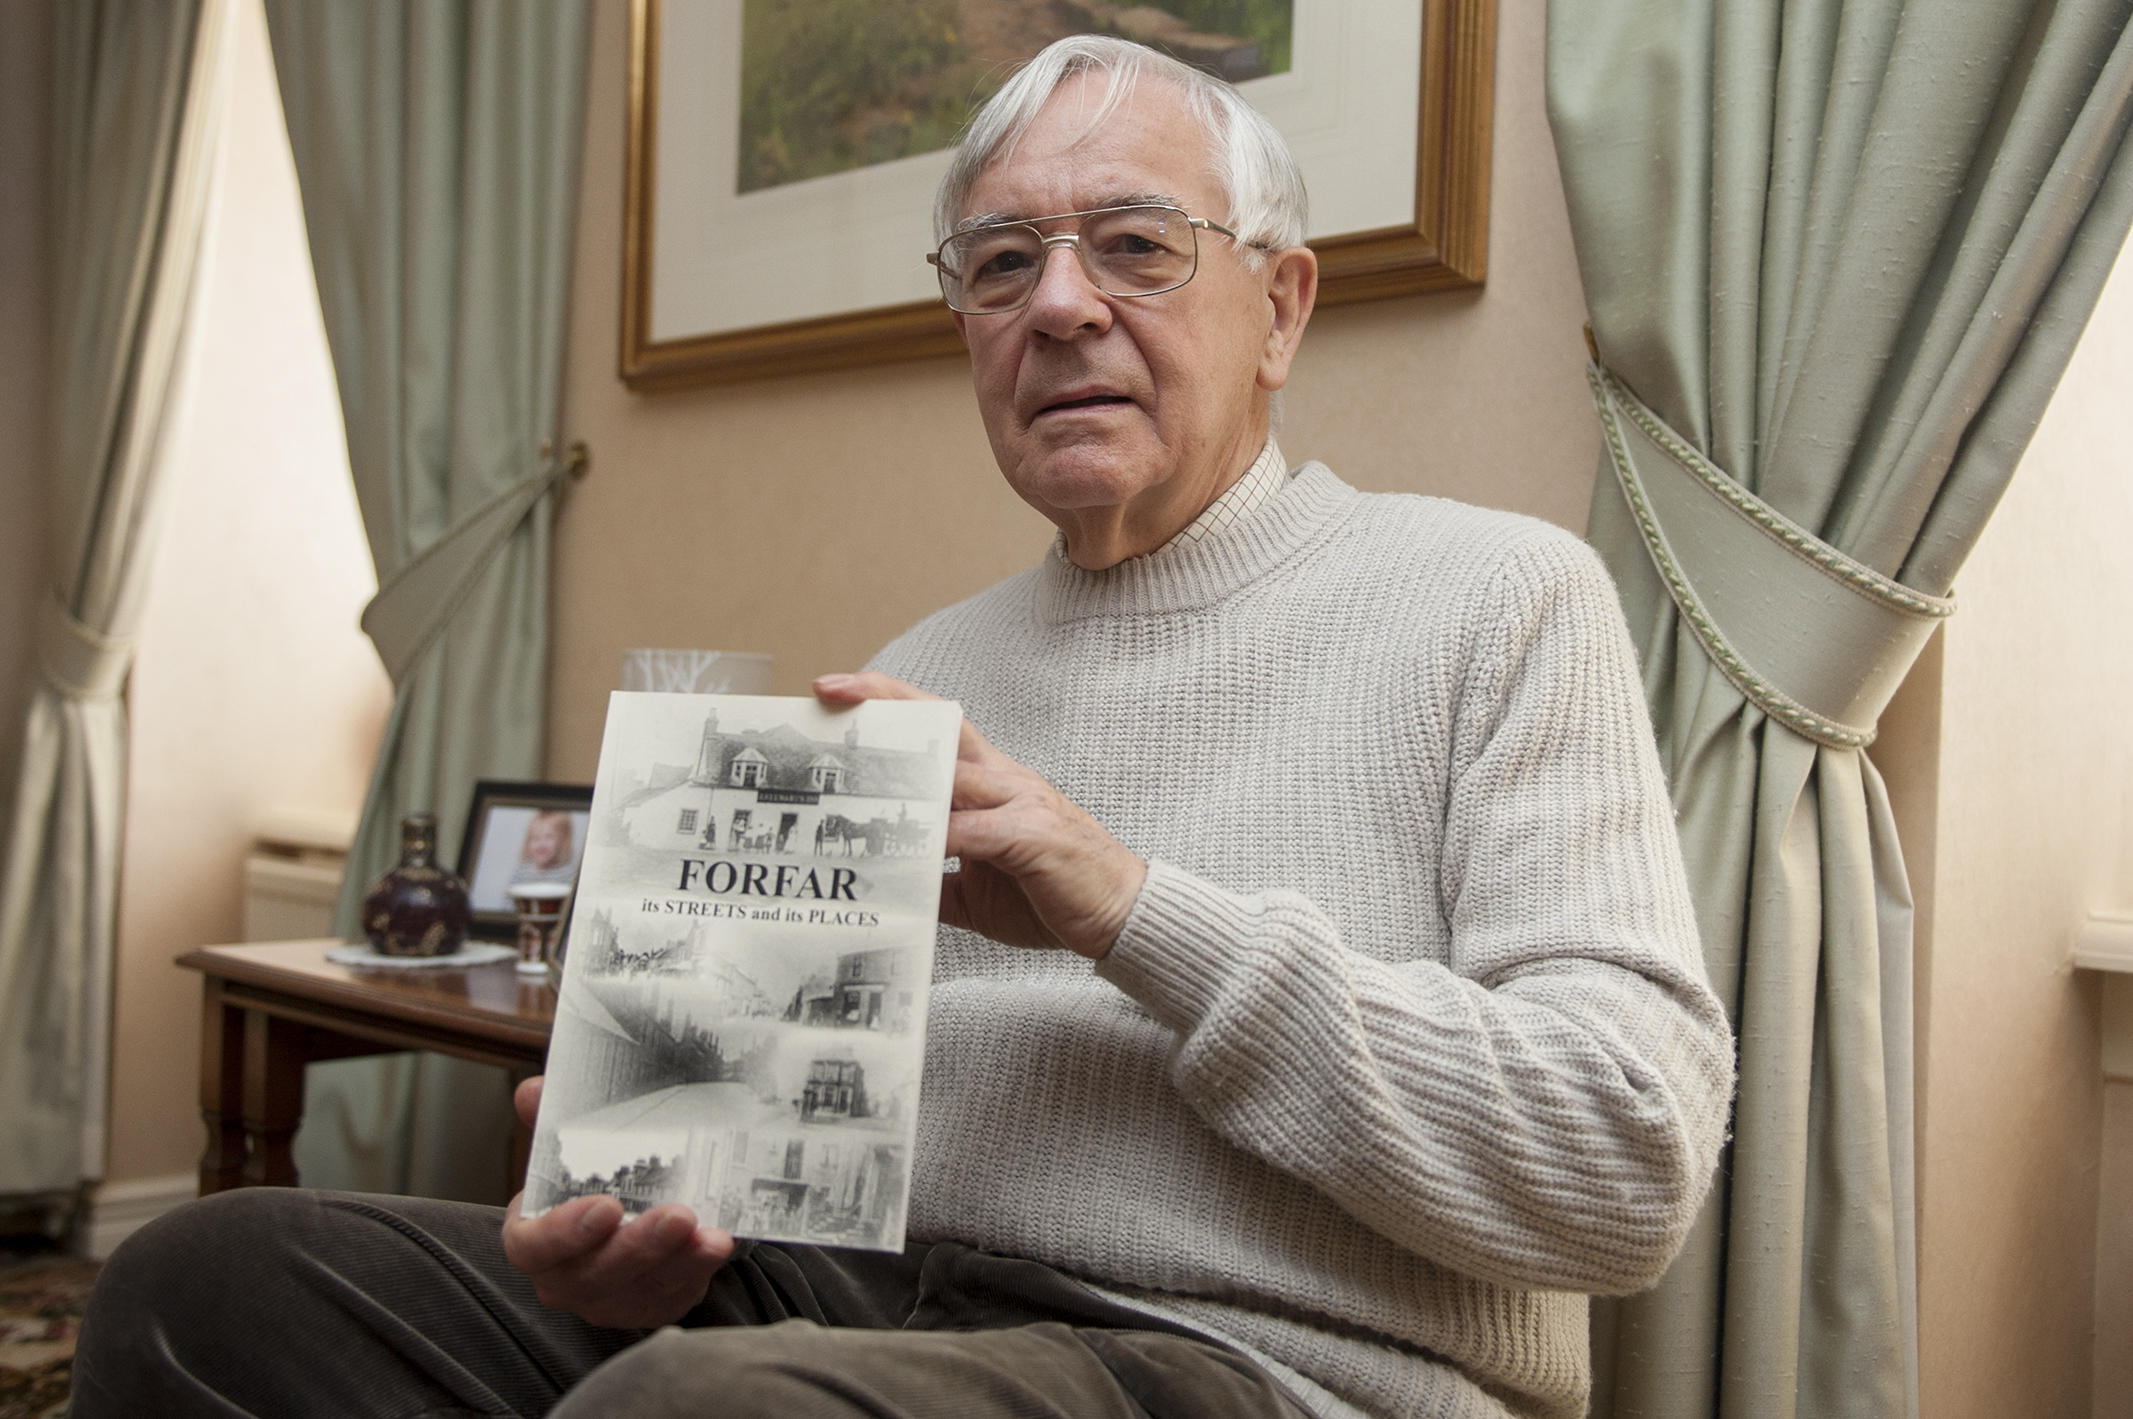 Forfar historian Alex Whyte with the recently published "Forfar - its streets and its places".